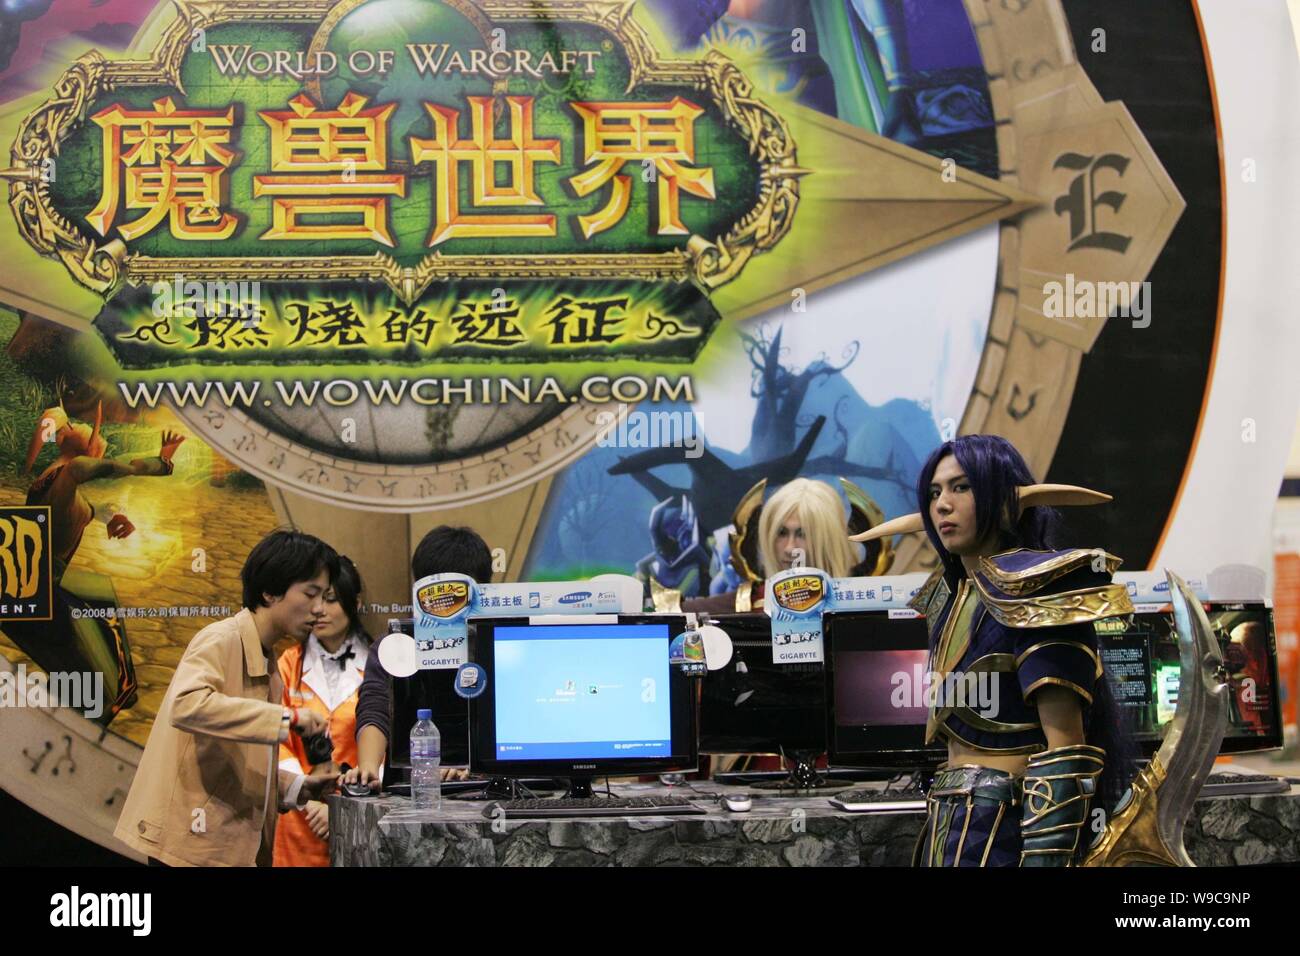 --FILE-- Chinese COSPLAY performers and visitors are seen at the stand of the online game, World of Warcraft, during an exhibition in Beijing, China, Stock Photo